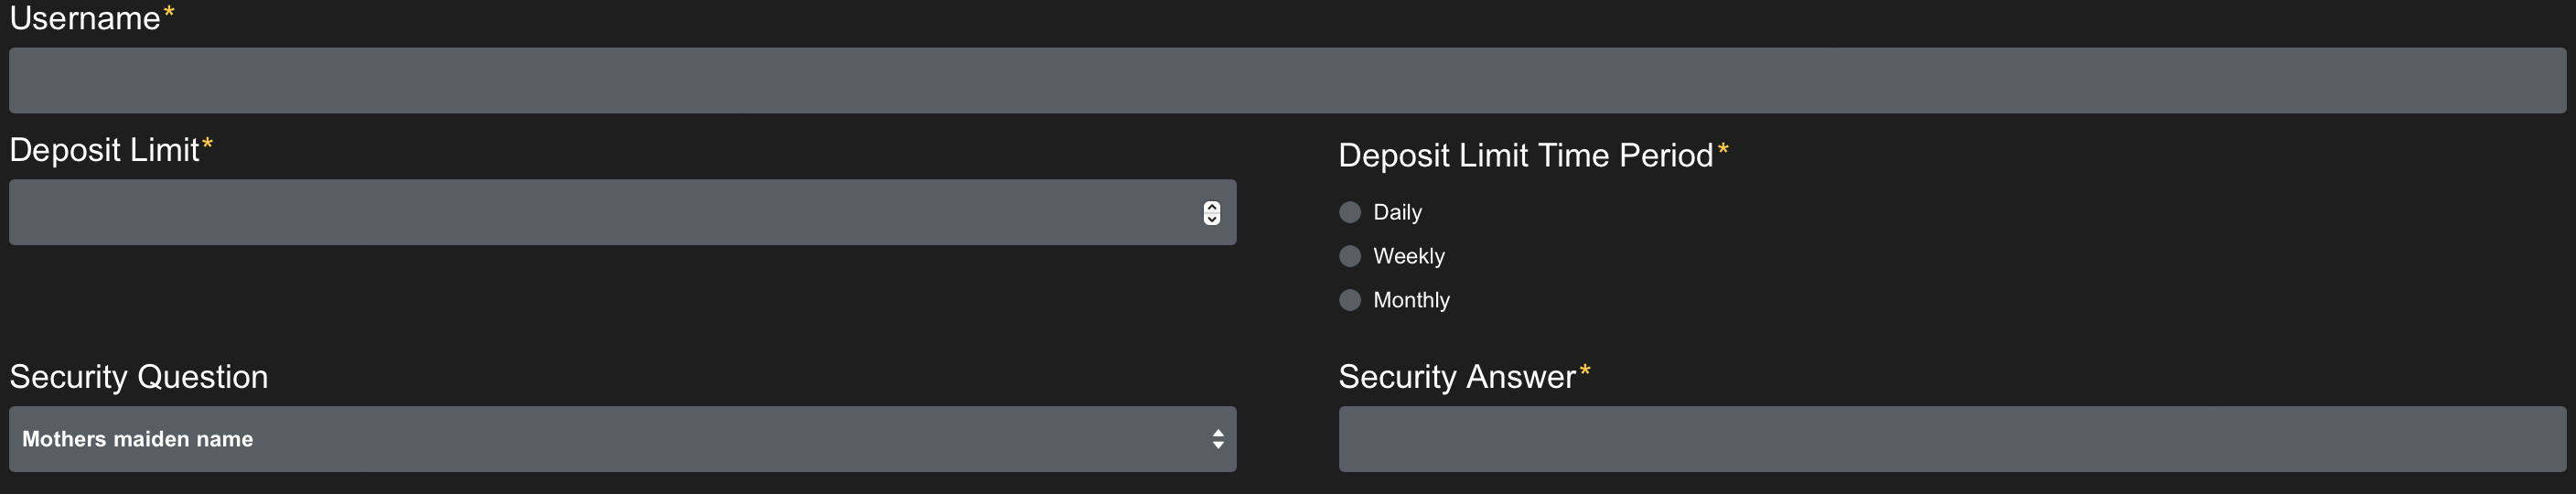 Choose a deposit limit and a security question